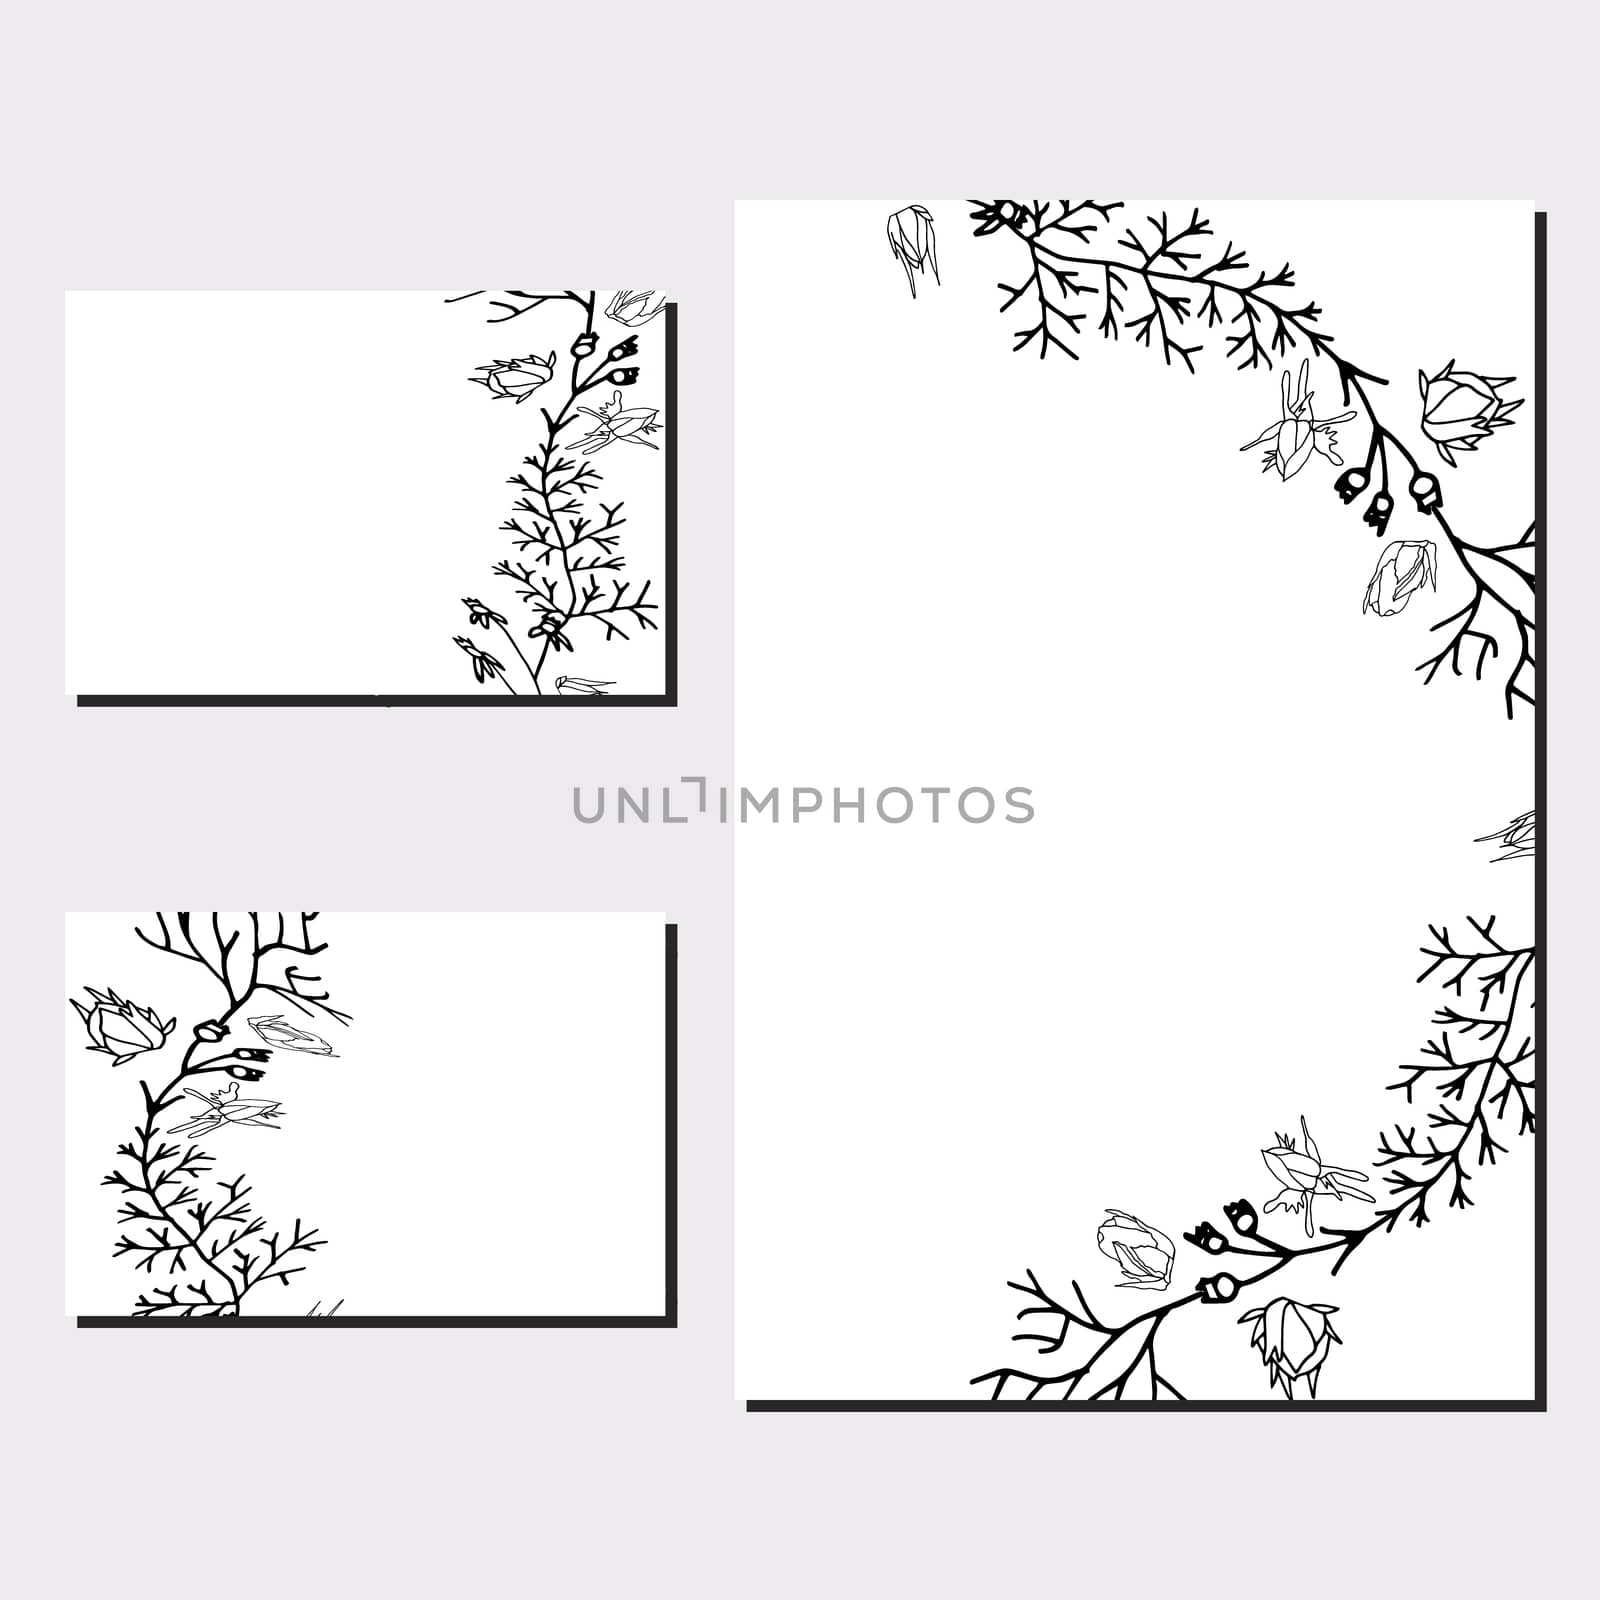 Set of cards for minimalistic design, announcements, greeting cards, posters, advertisement.